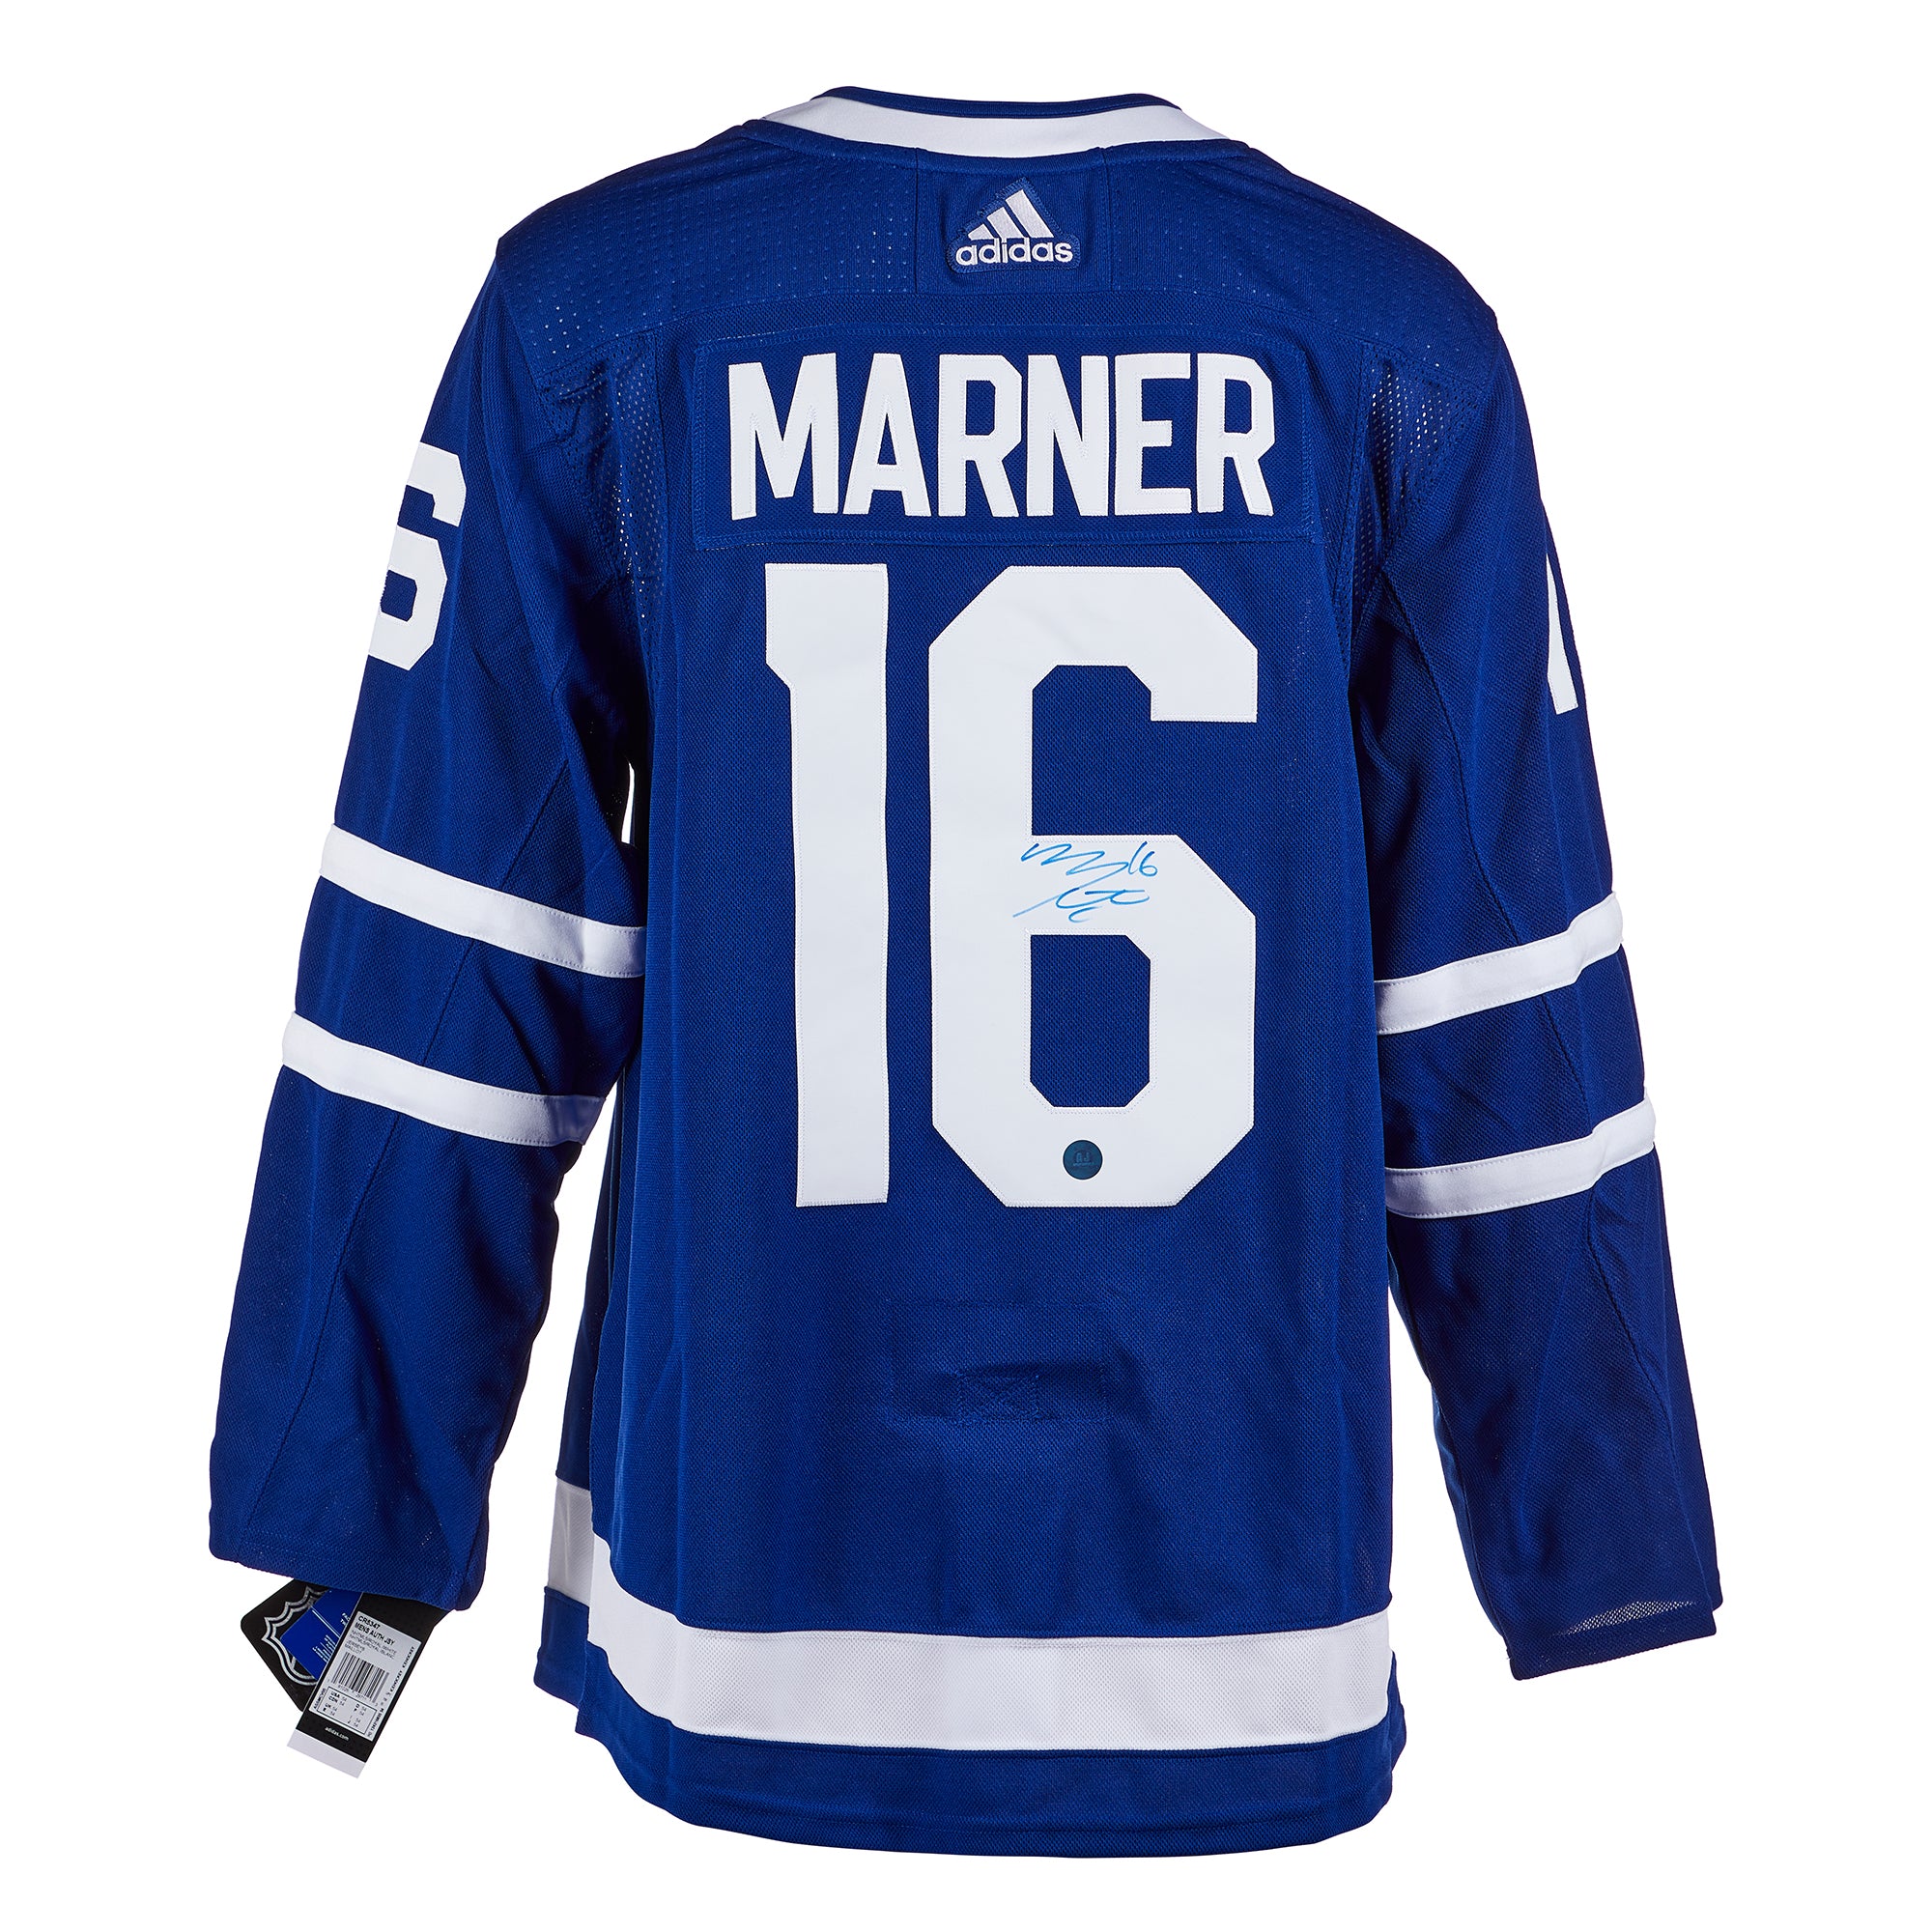 Toronto Maple Leafs Mitch Marner adidas Blue Authentic Player